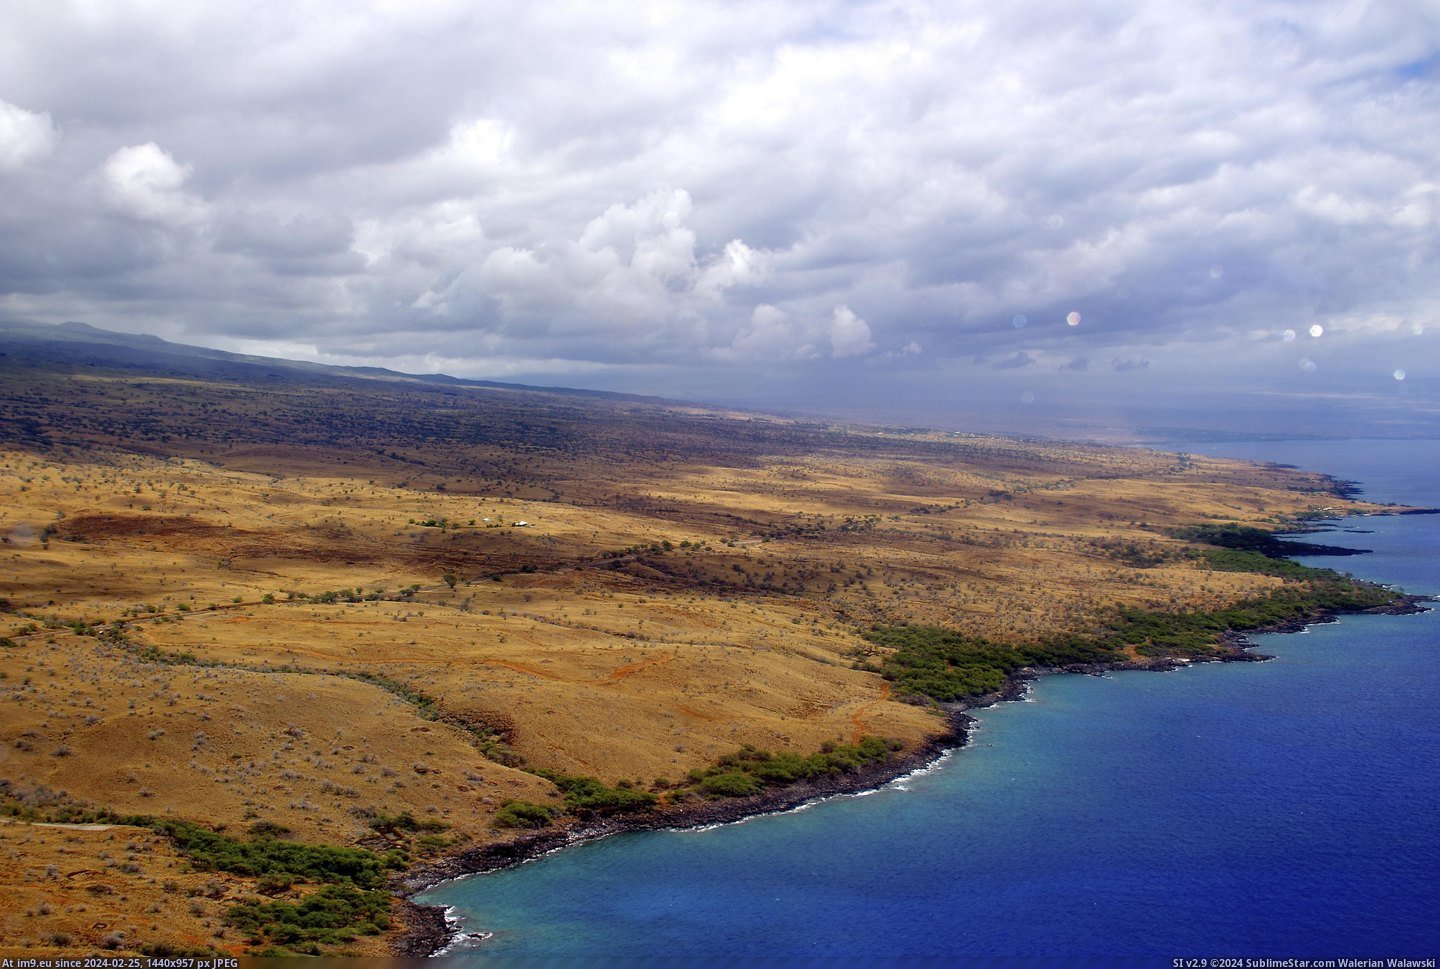 #One #Big #World #Hawaii #Climates #Island #Vol #Desert [Earthporn] Hawaii's Big Island has one of the most diverse climates in the world. 1-3 dense rainforest, 1-3 desert, and 1-3 vol Pic. (Image of album My r/EARTHPORN favs))